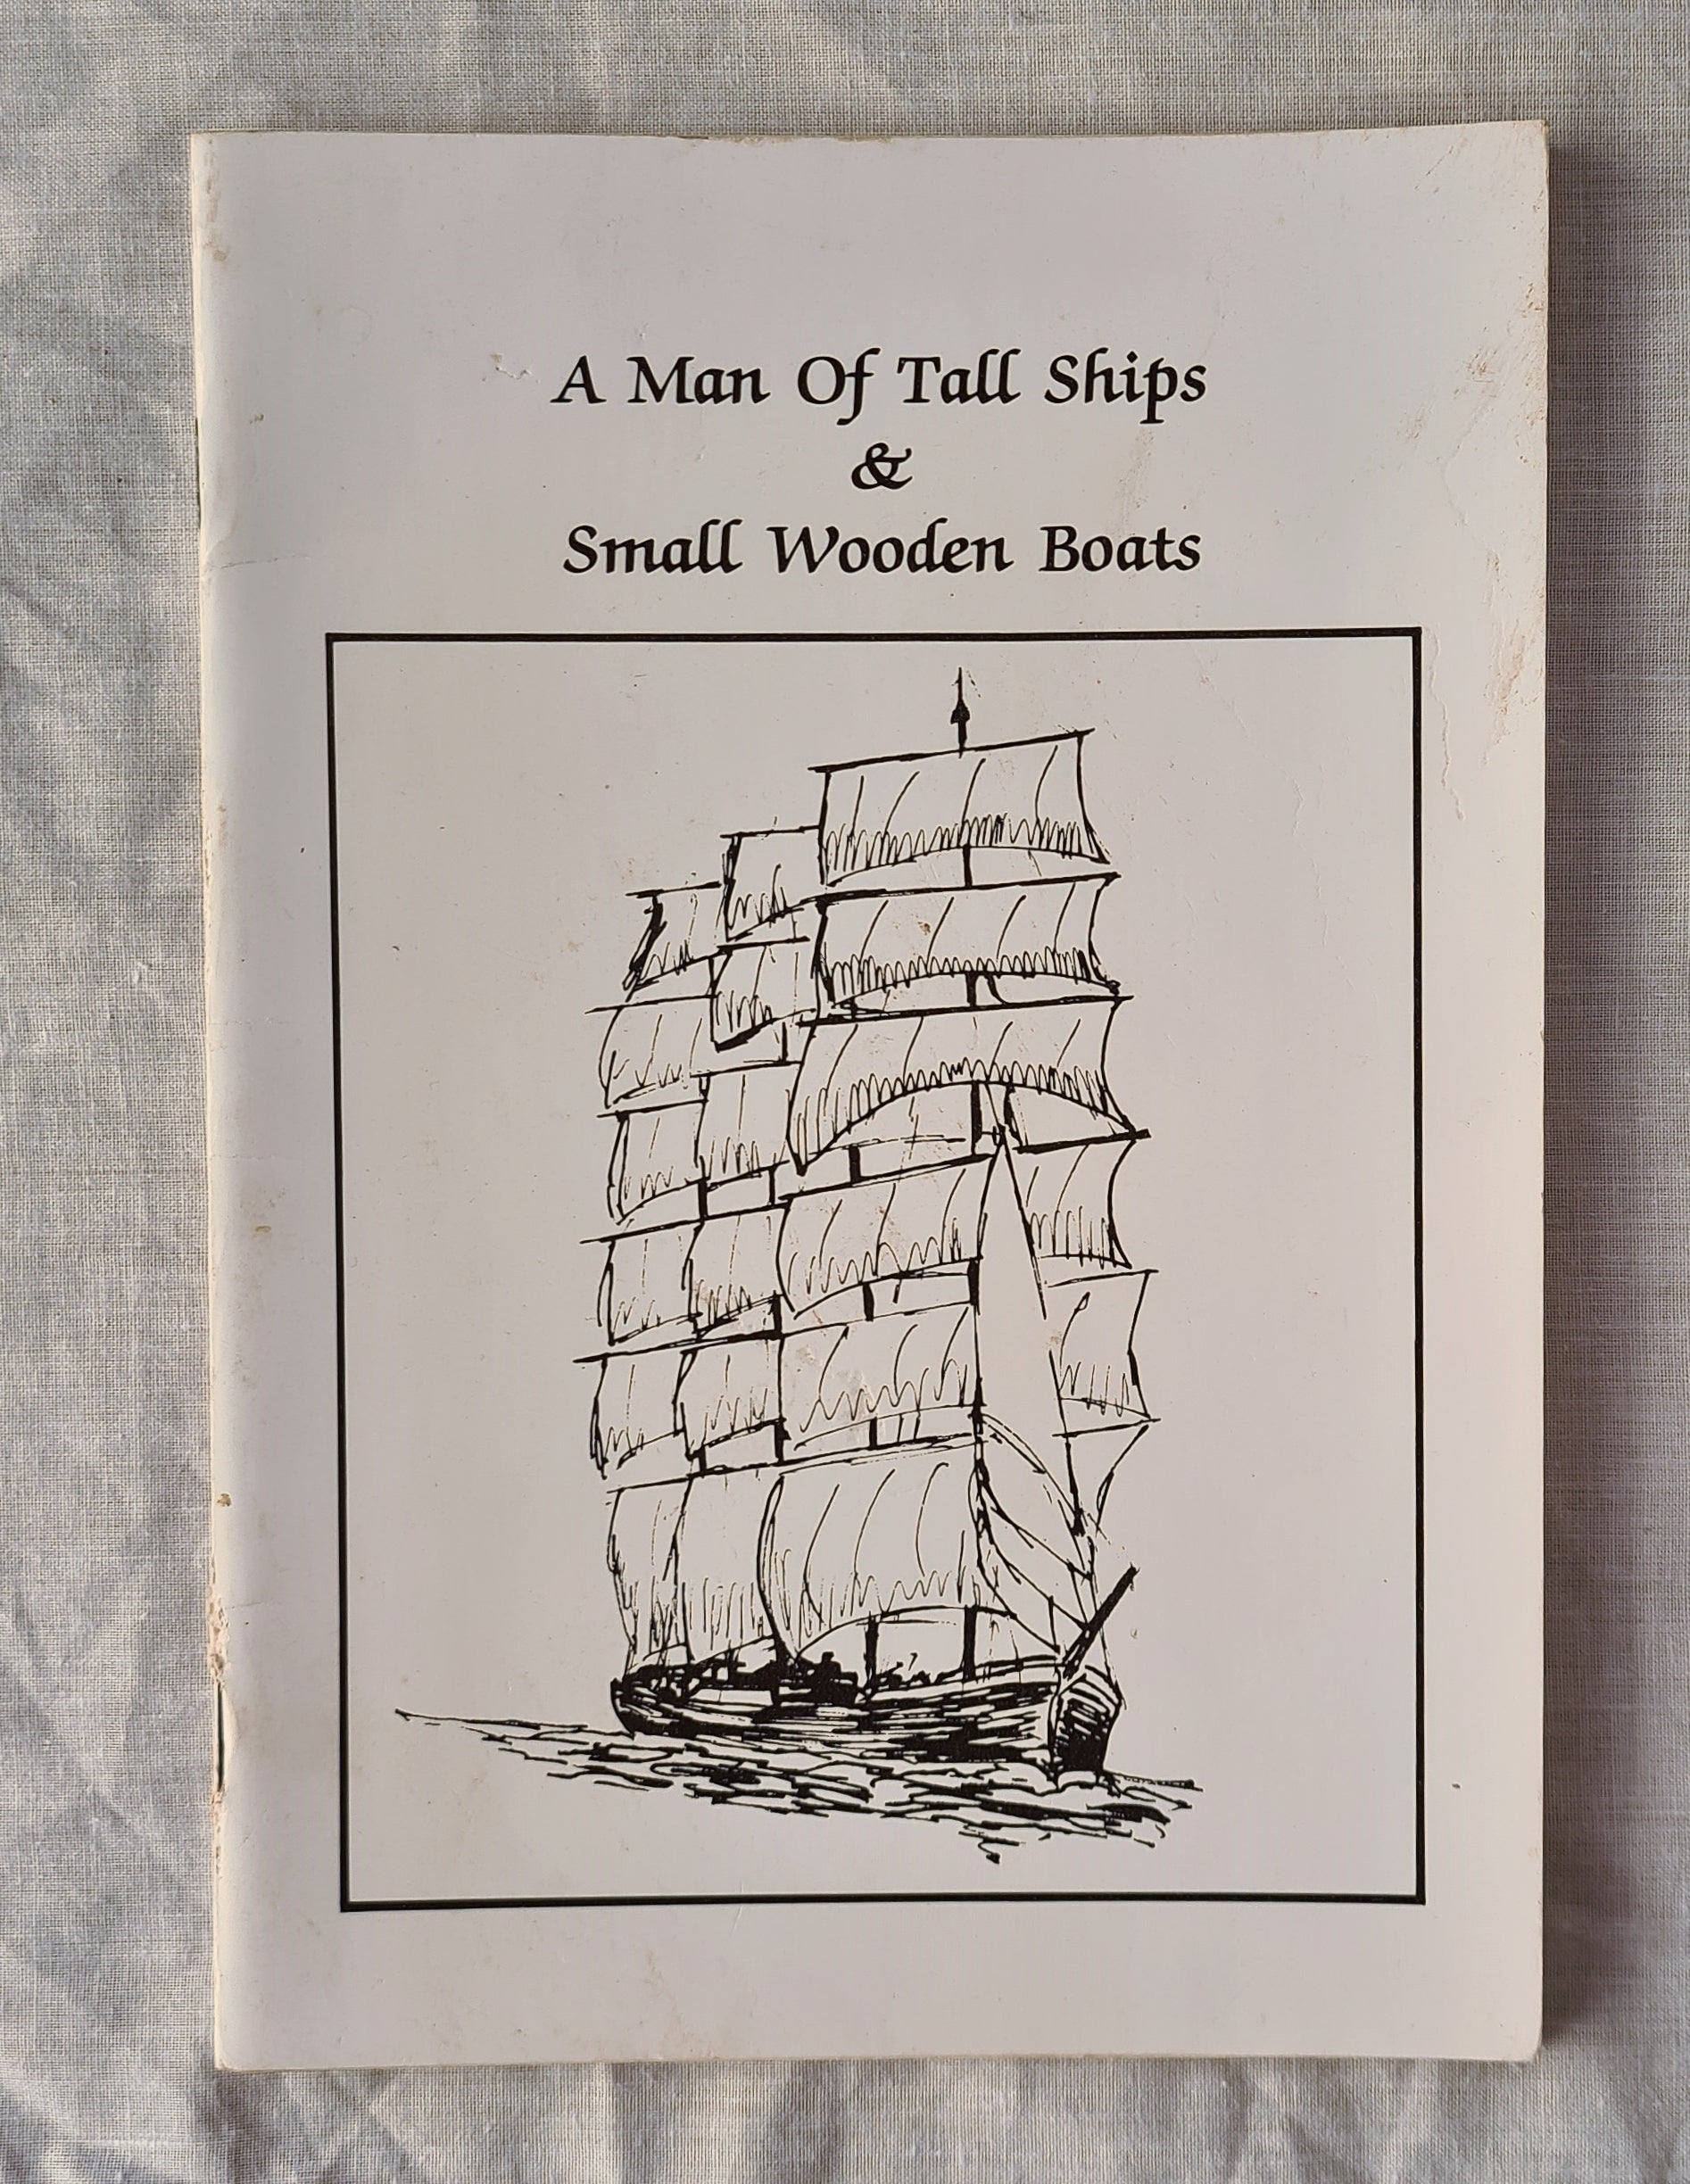 A Man of Tall Ships & Small Wooden Boats by C. E. (Ned) Holland